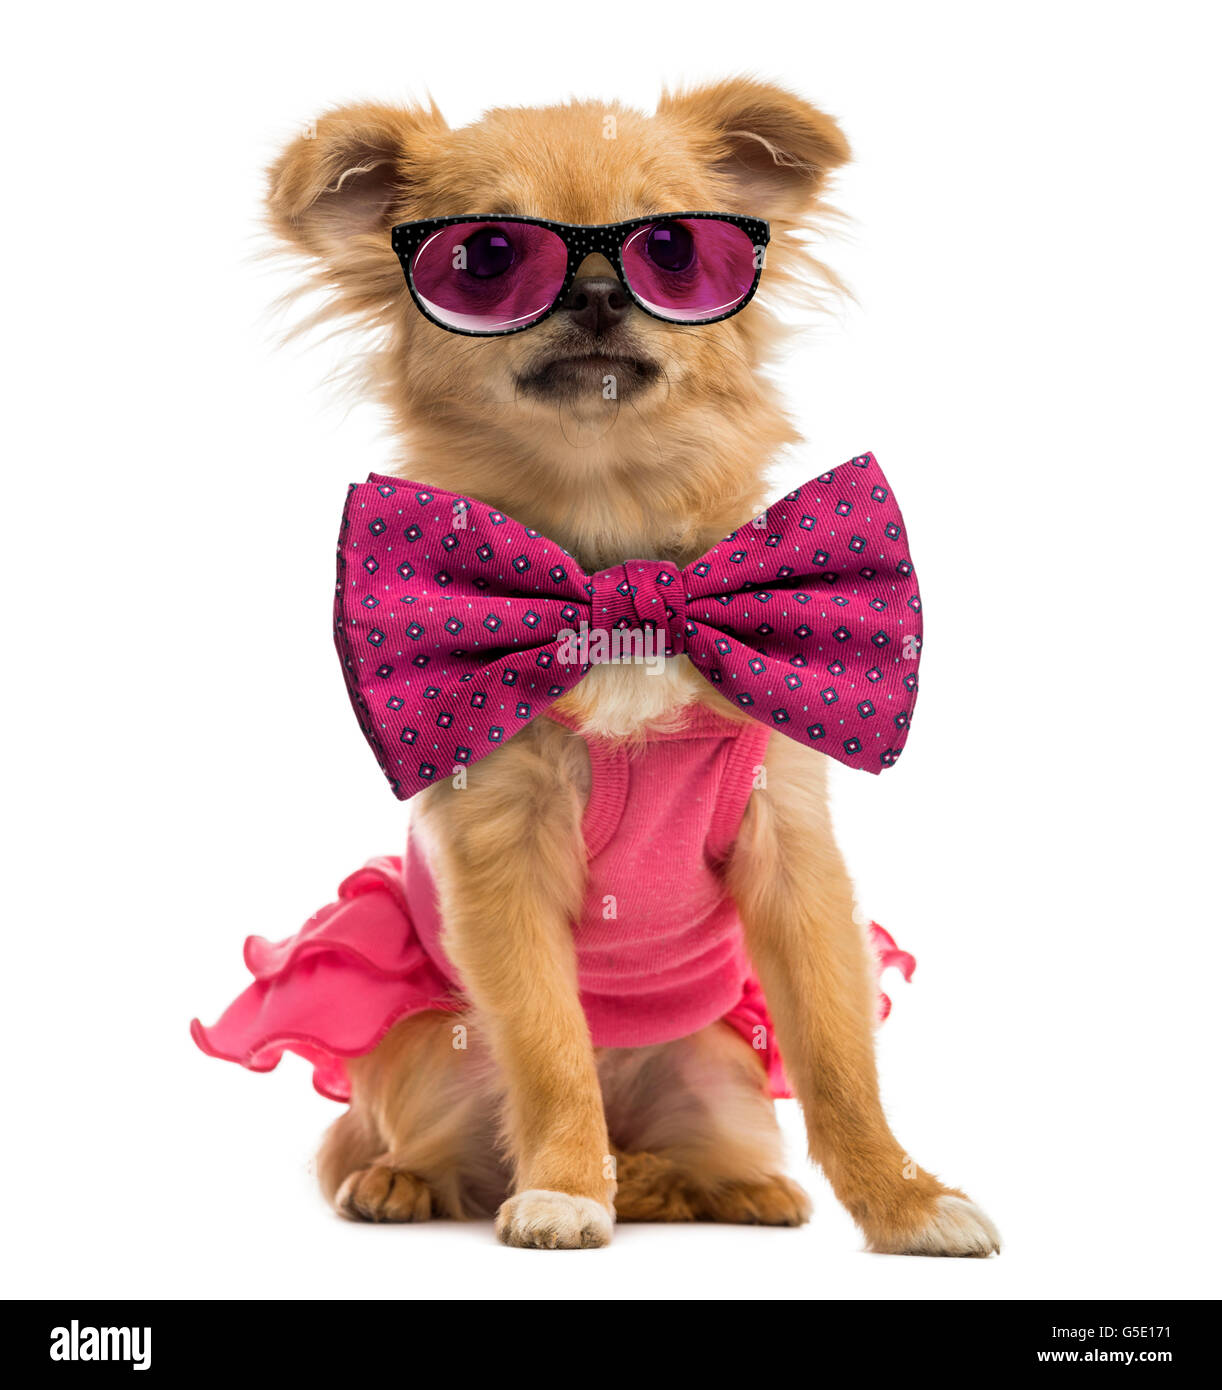 Chihuahua puppy wearing a pink shirt, glasses and a bow tie Stock Photo